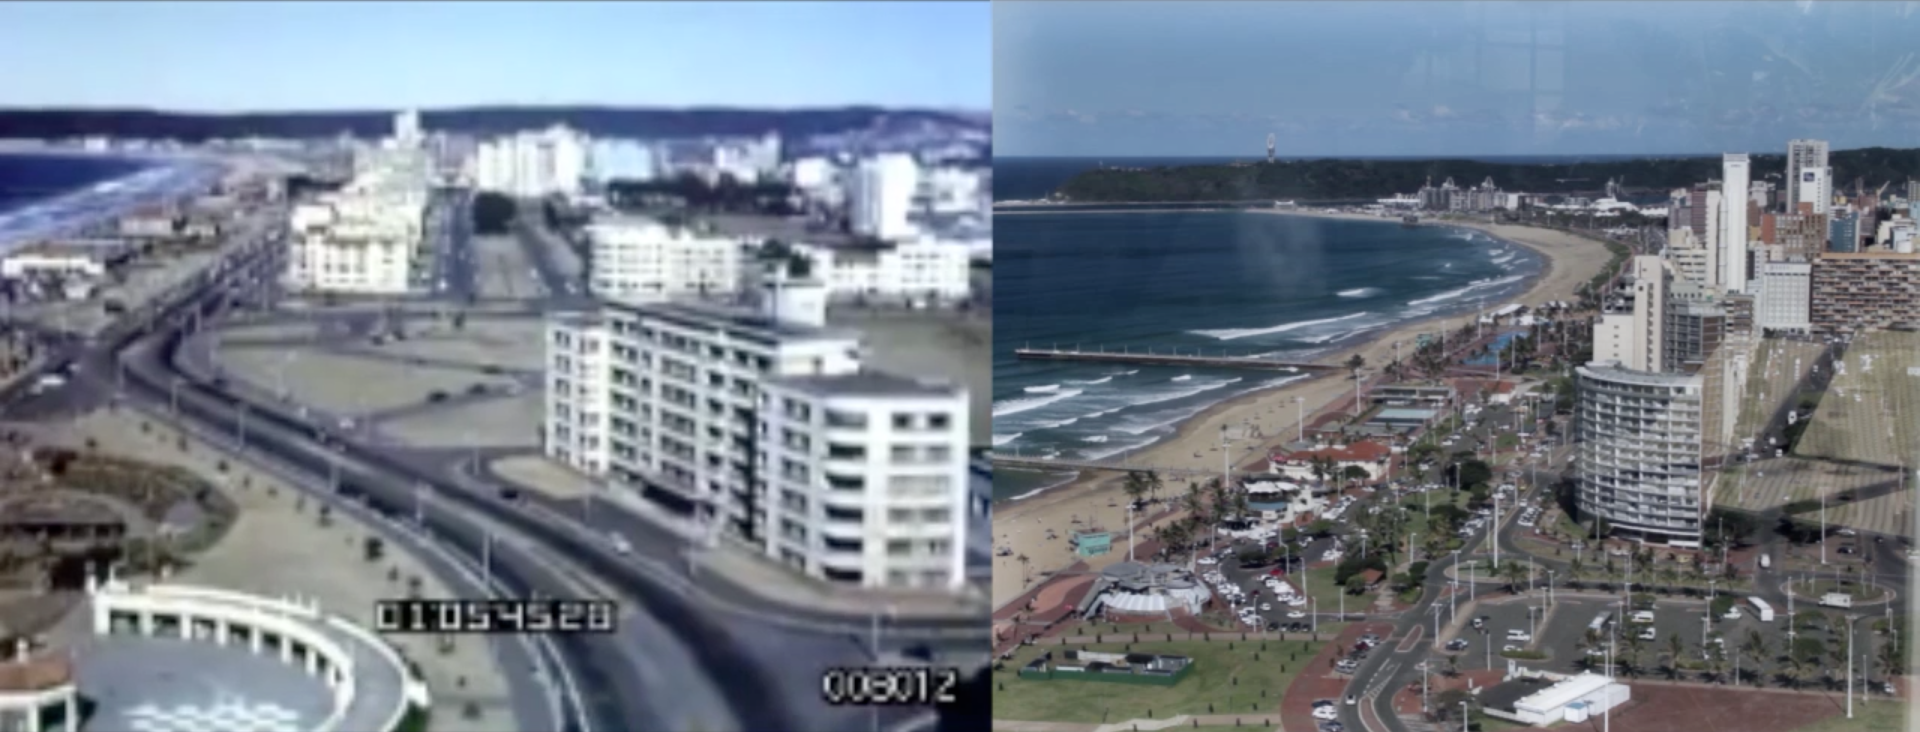 Comparing the Durban beachfront over 60 years.